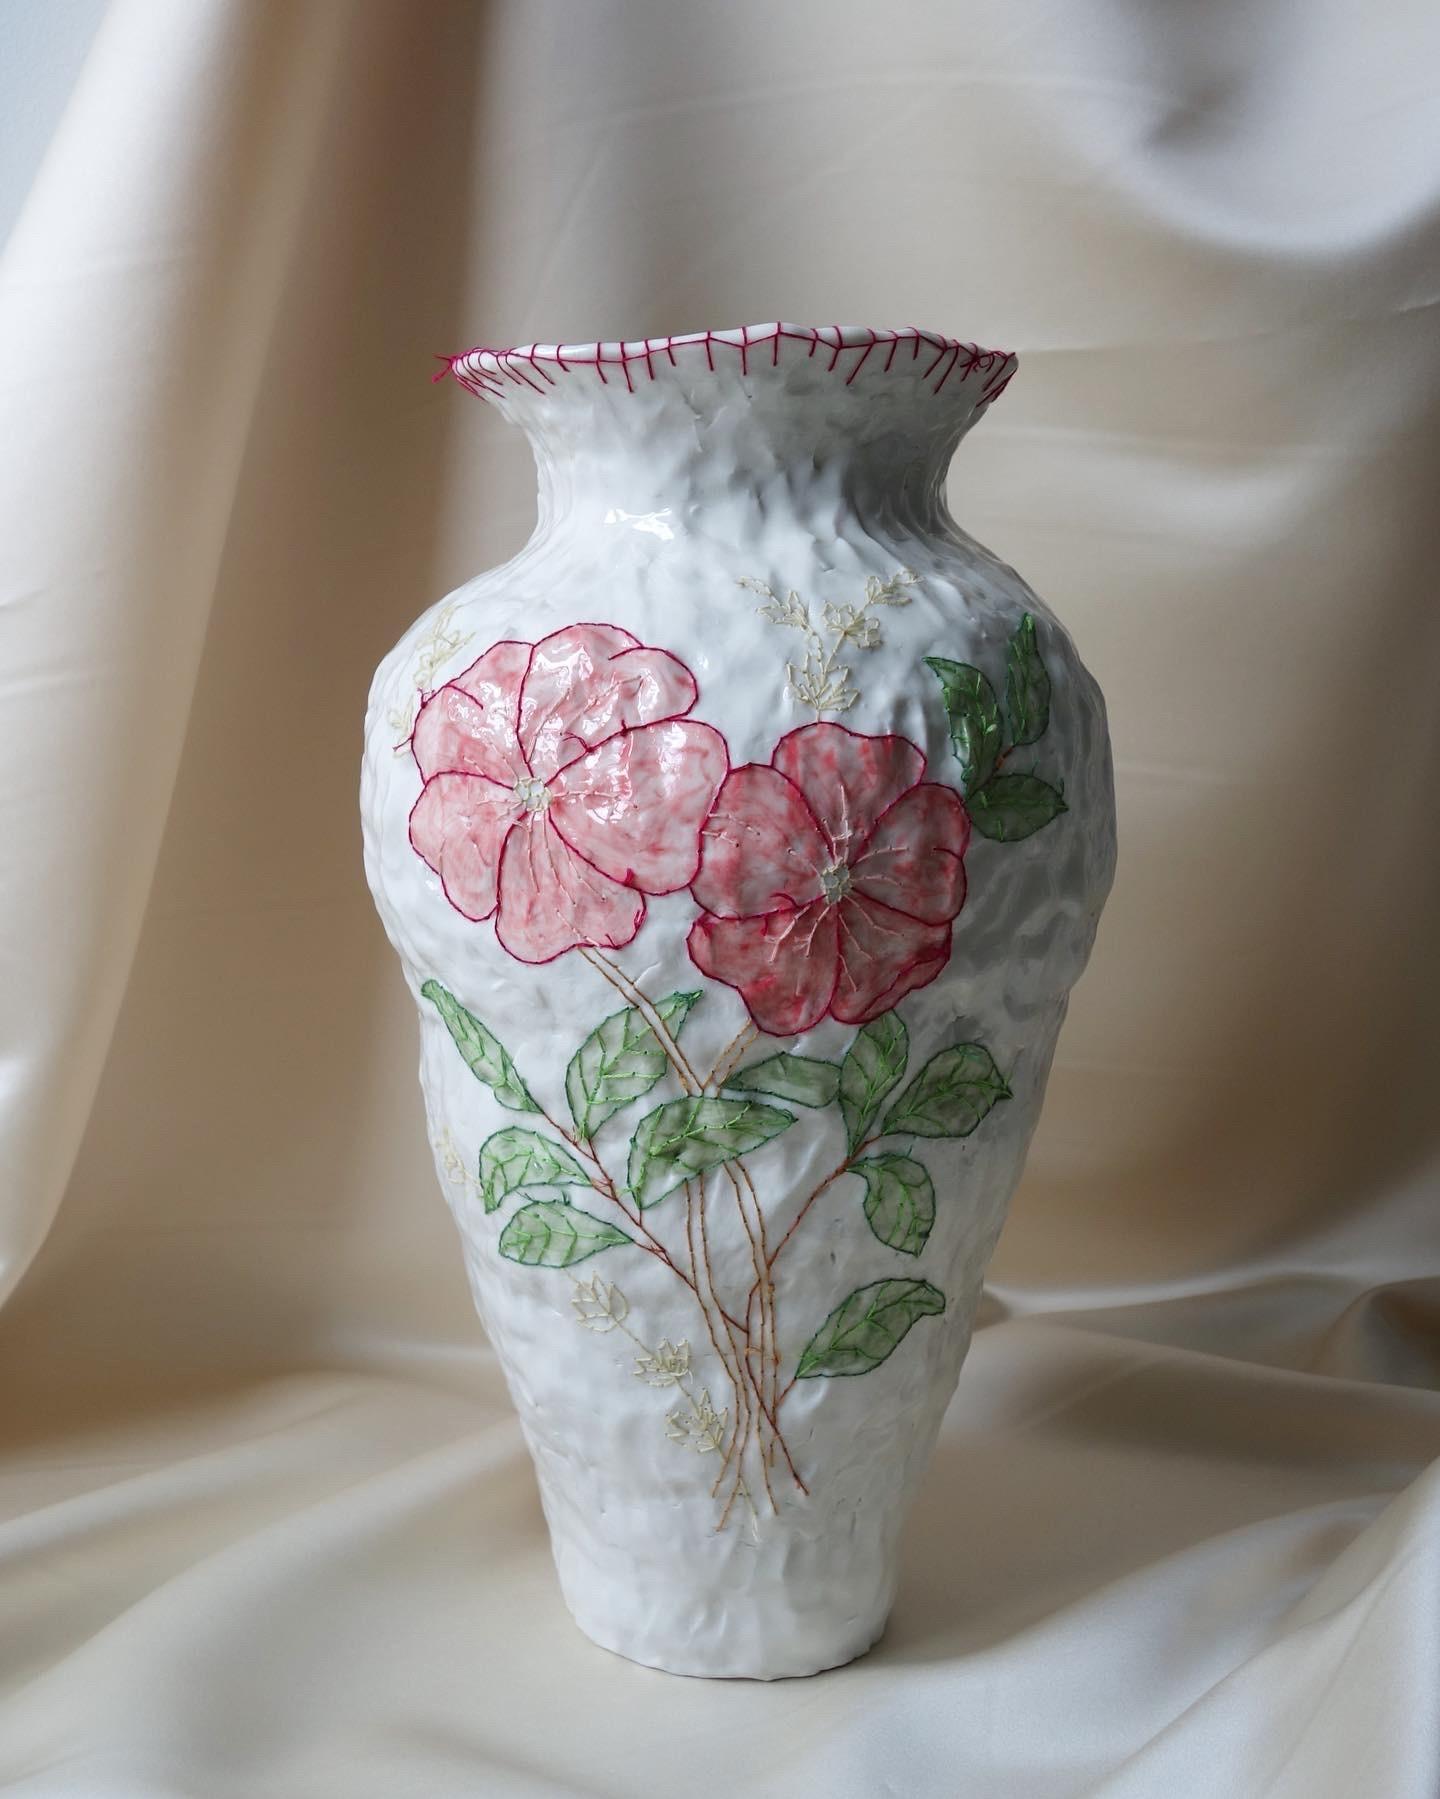 Emboridery Vase by Caroline Harrius
Dimensions: 45 H cm
Material: Porcelain

The pieces with emboridery is about 45 cm high, coiled in porcelain, painted with slip, glazed on the outside. After the final firing they are emboridered with a cotton